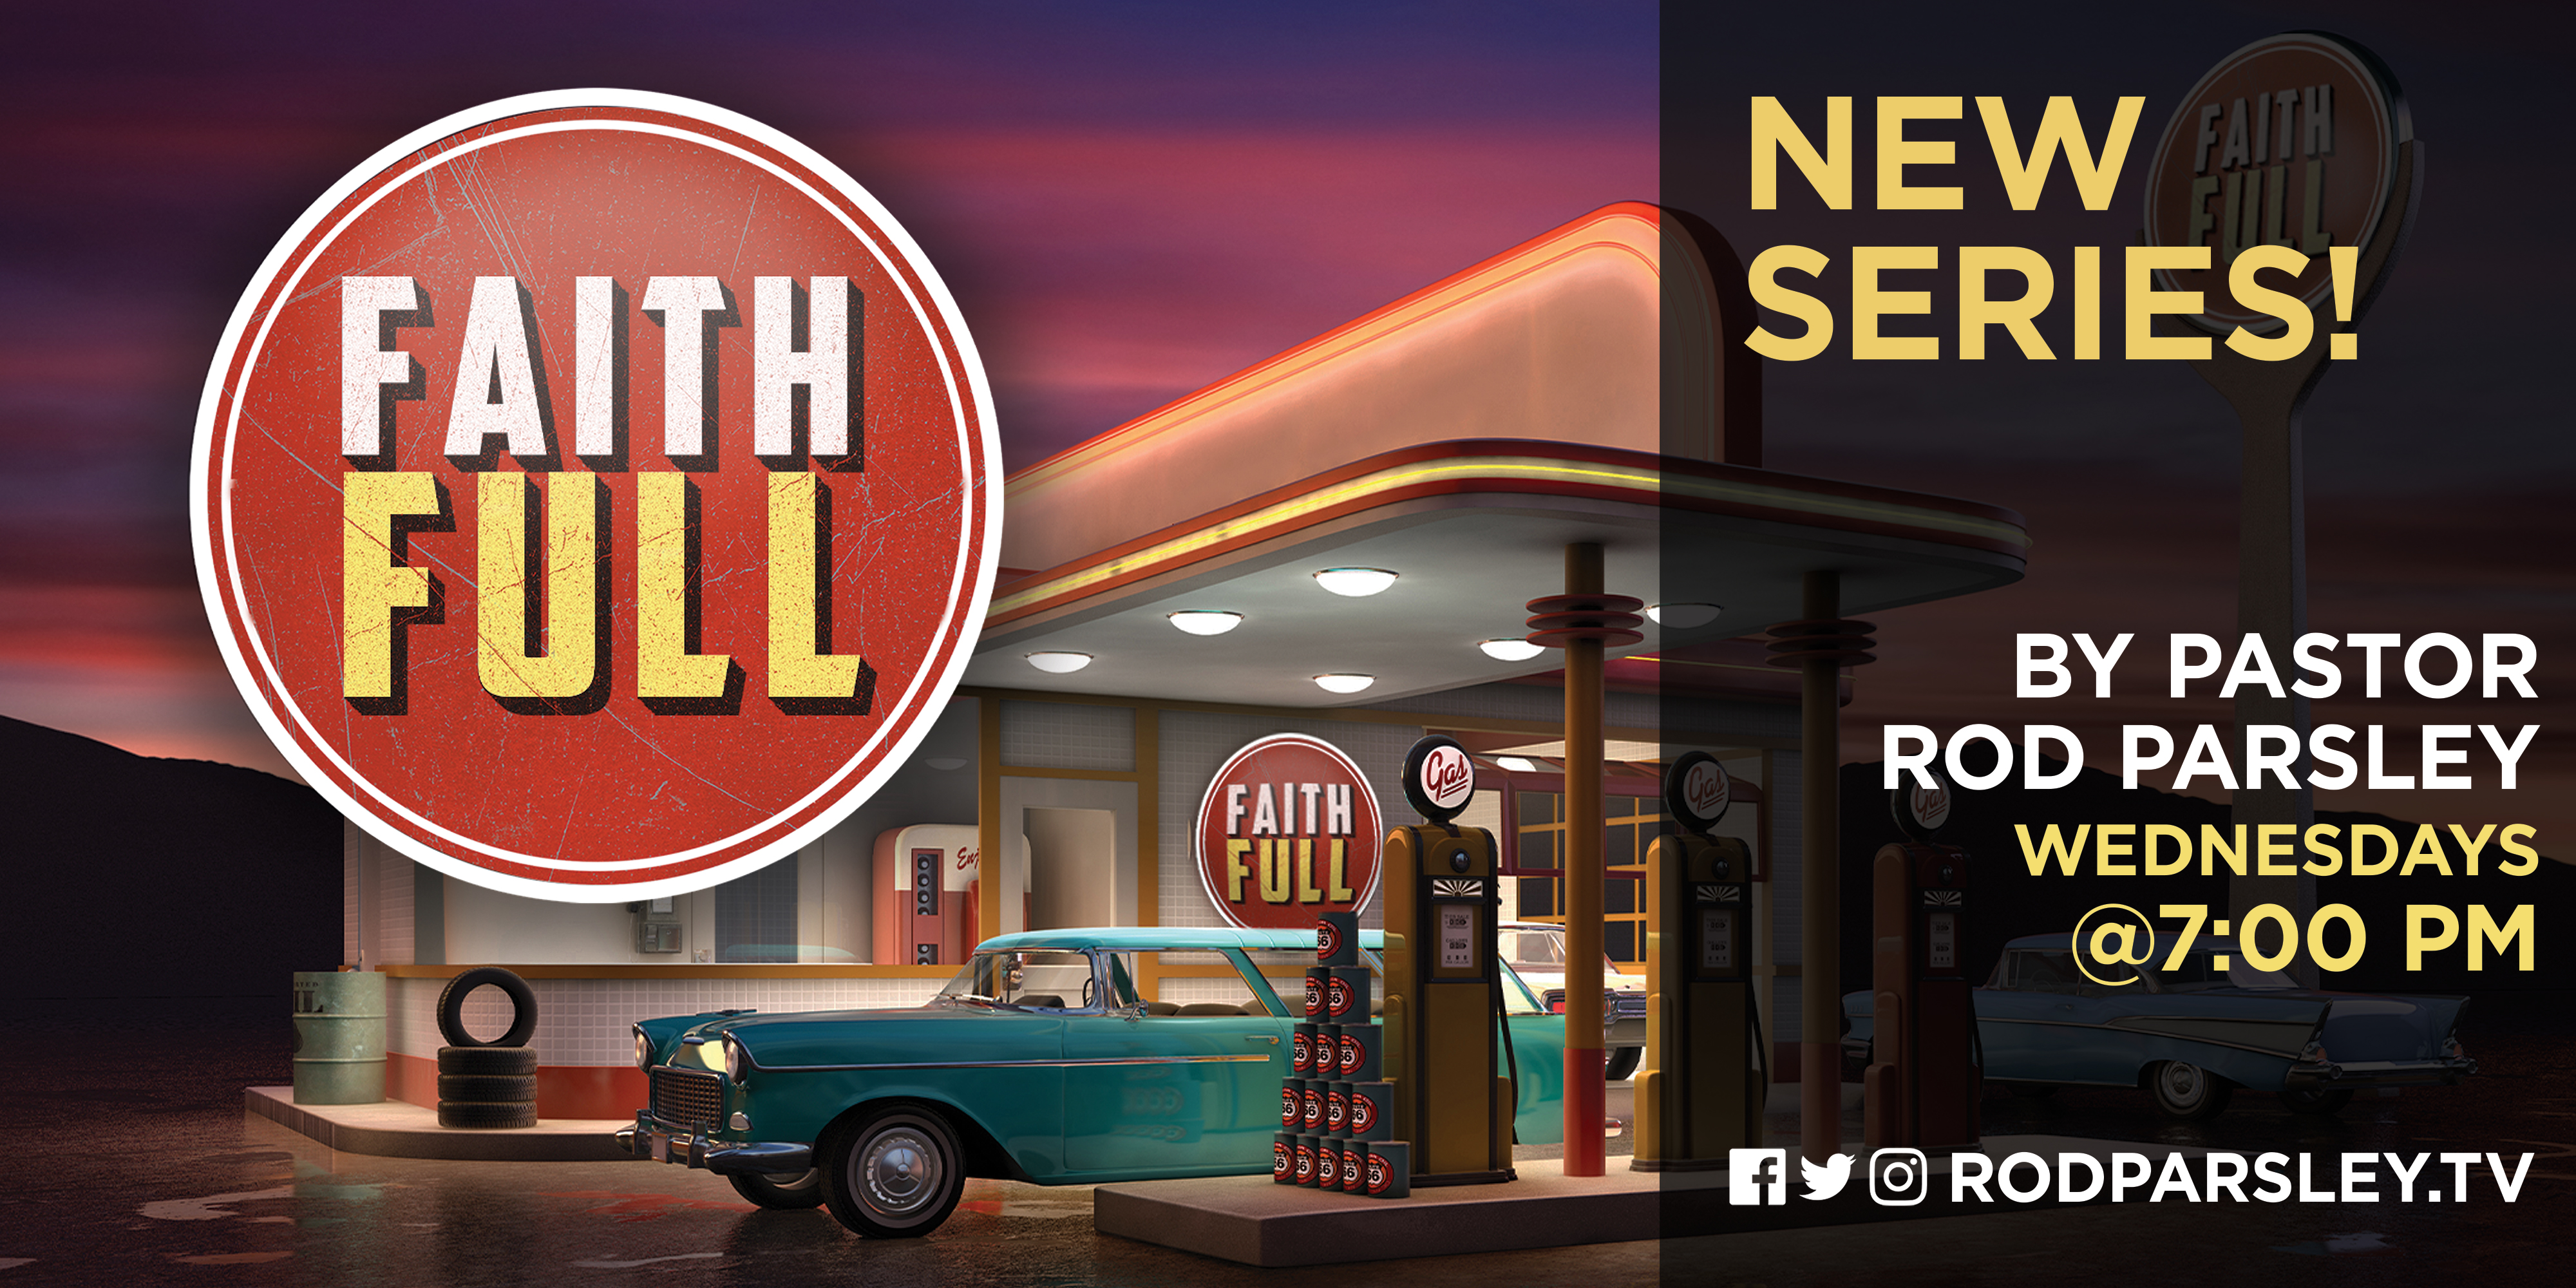 Faith Full New Series by Pastor Rod Parsley Wednesdays at 7pm Facebook Twitter Instagram Rodparsley.Tv 